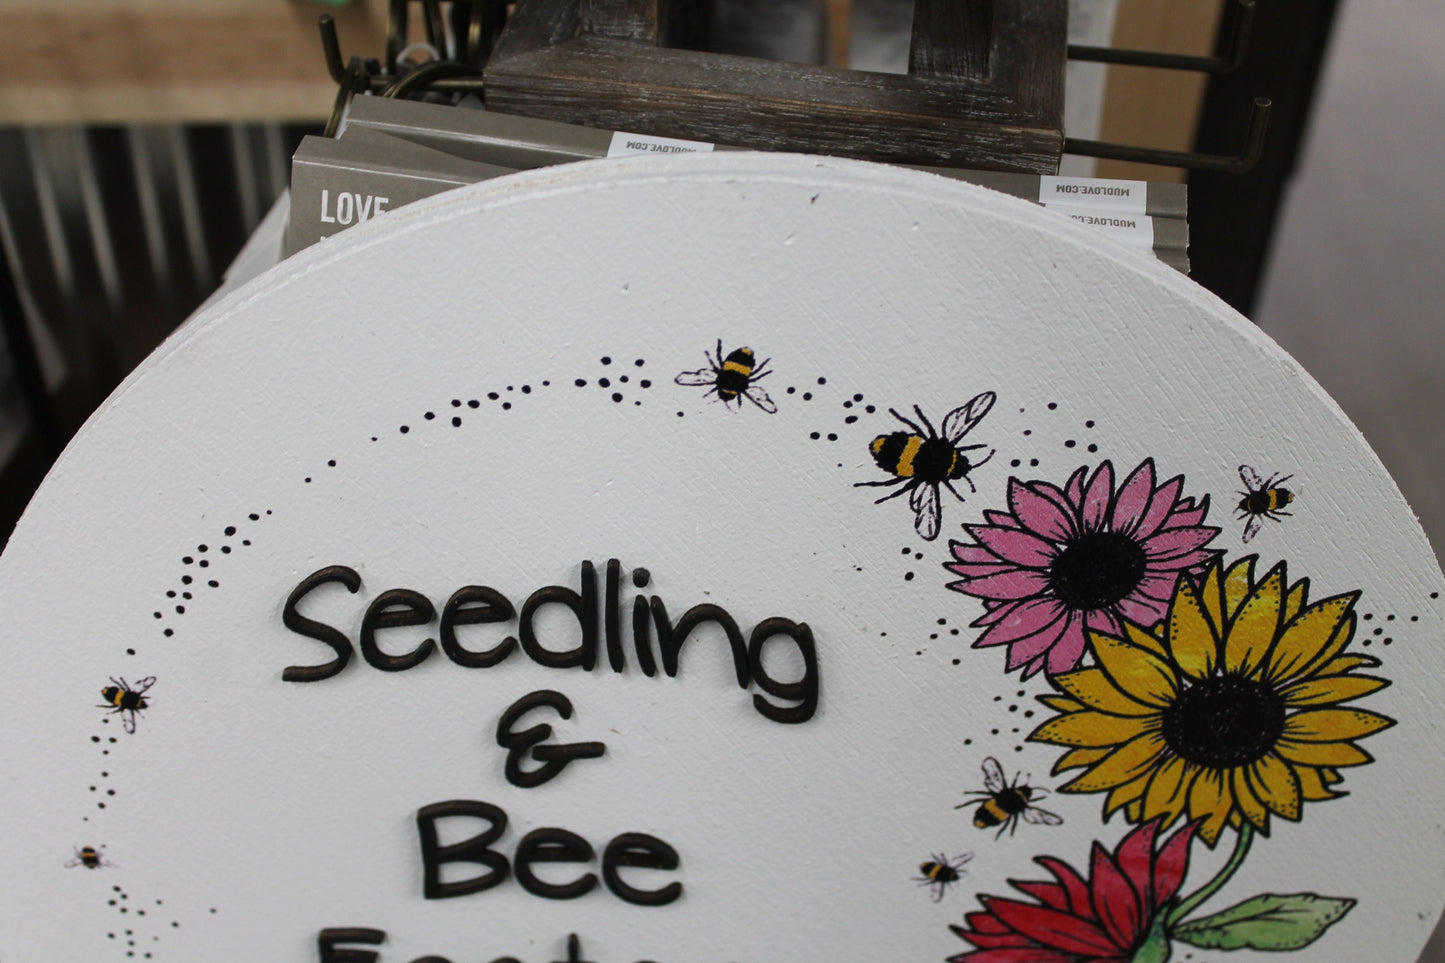 Floral Border Round Sign Seeds and Bees Small Business Uv printed and Raised Letters Handmade 3D Factory Greenhouse Grower Custom Made